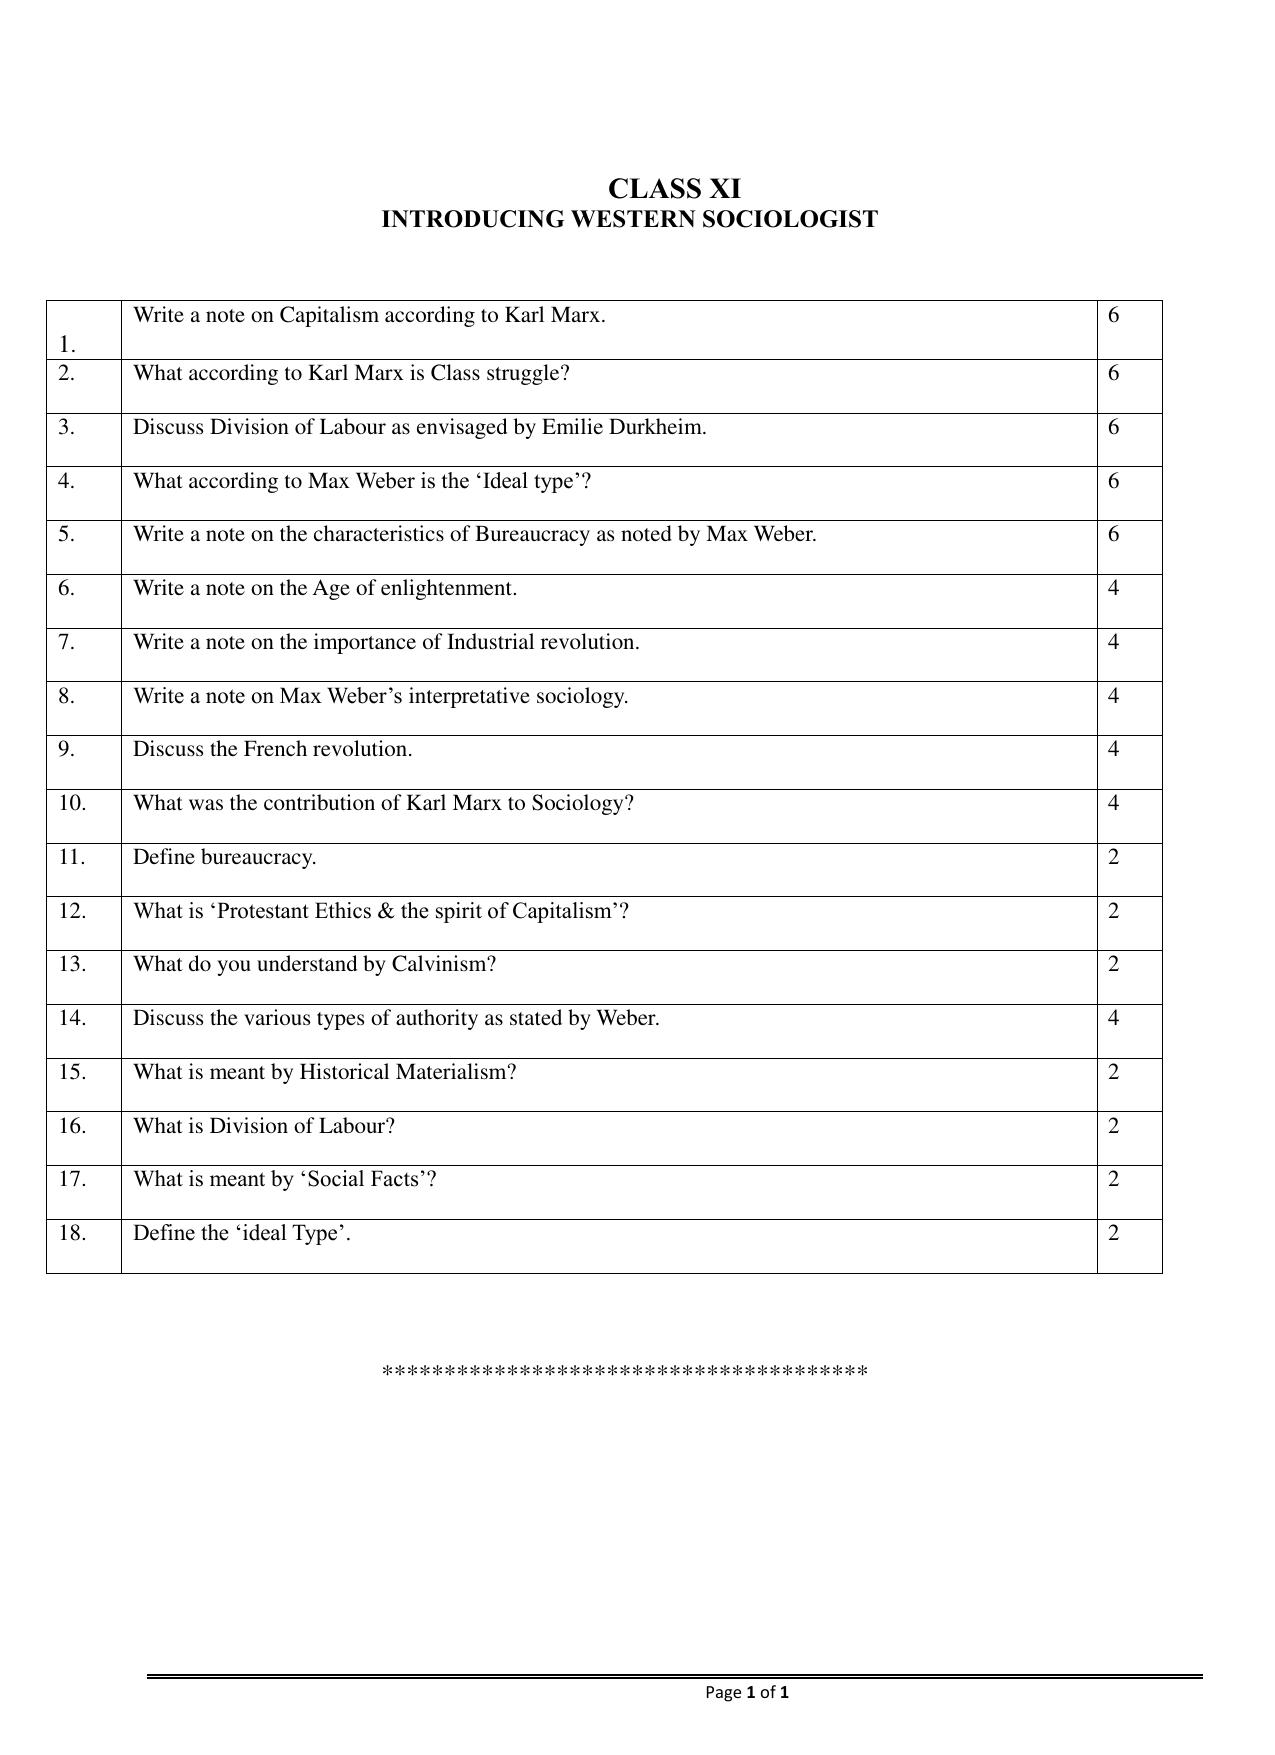 CBSE Worksheets for Class 11 Sociology Western Sociologists Assignment - Page 1